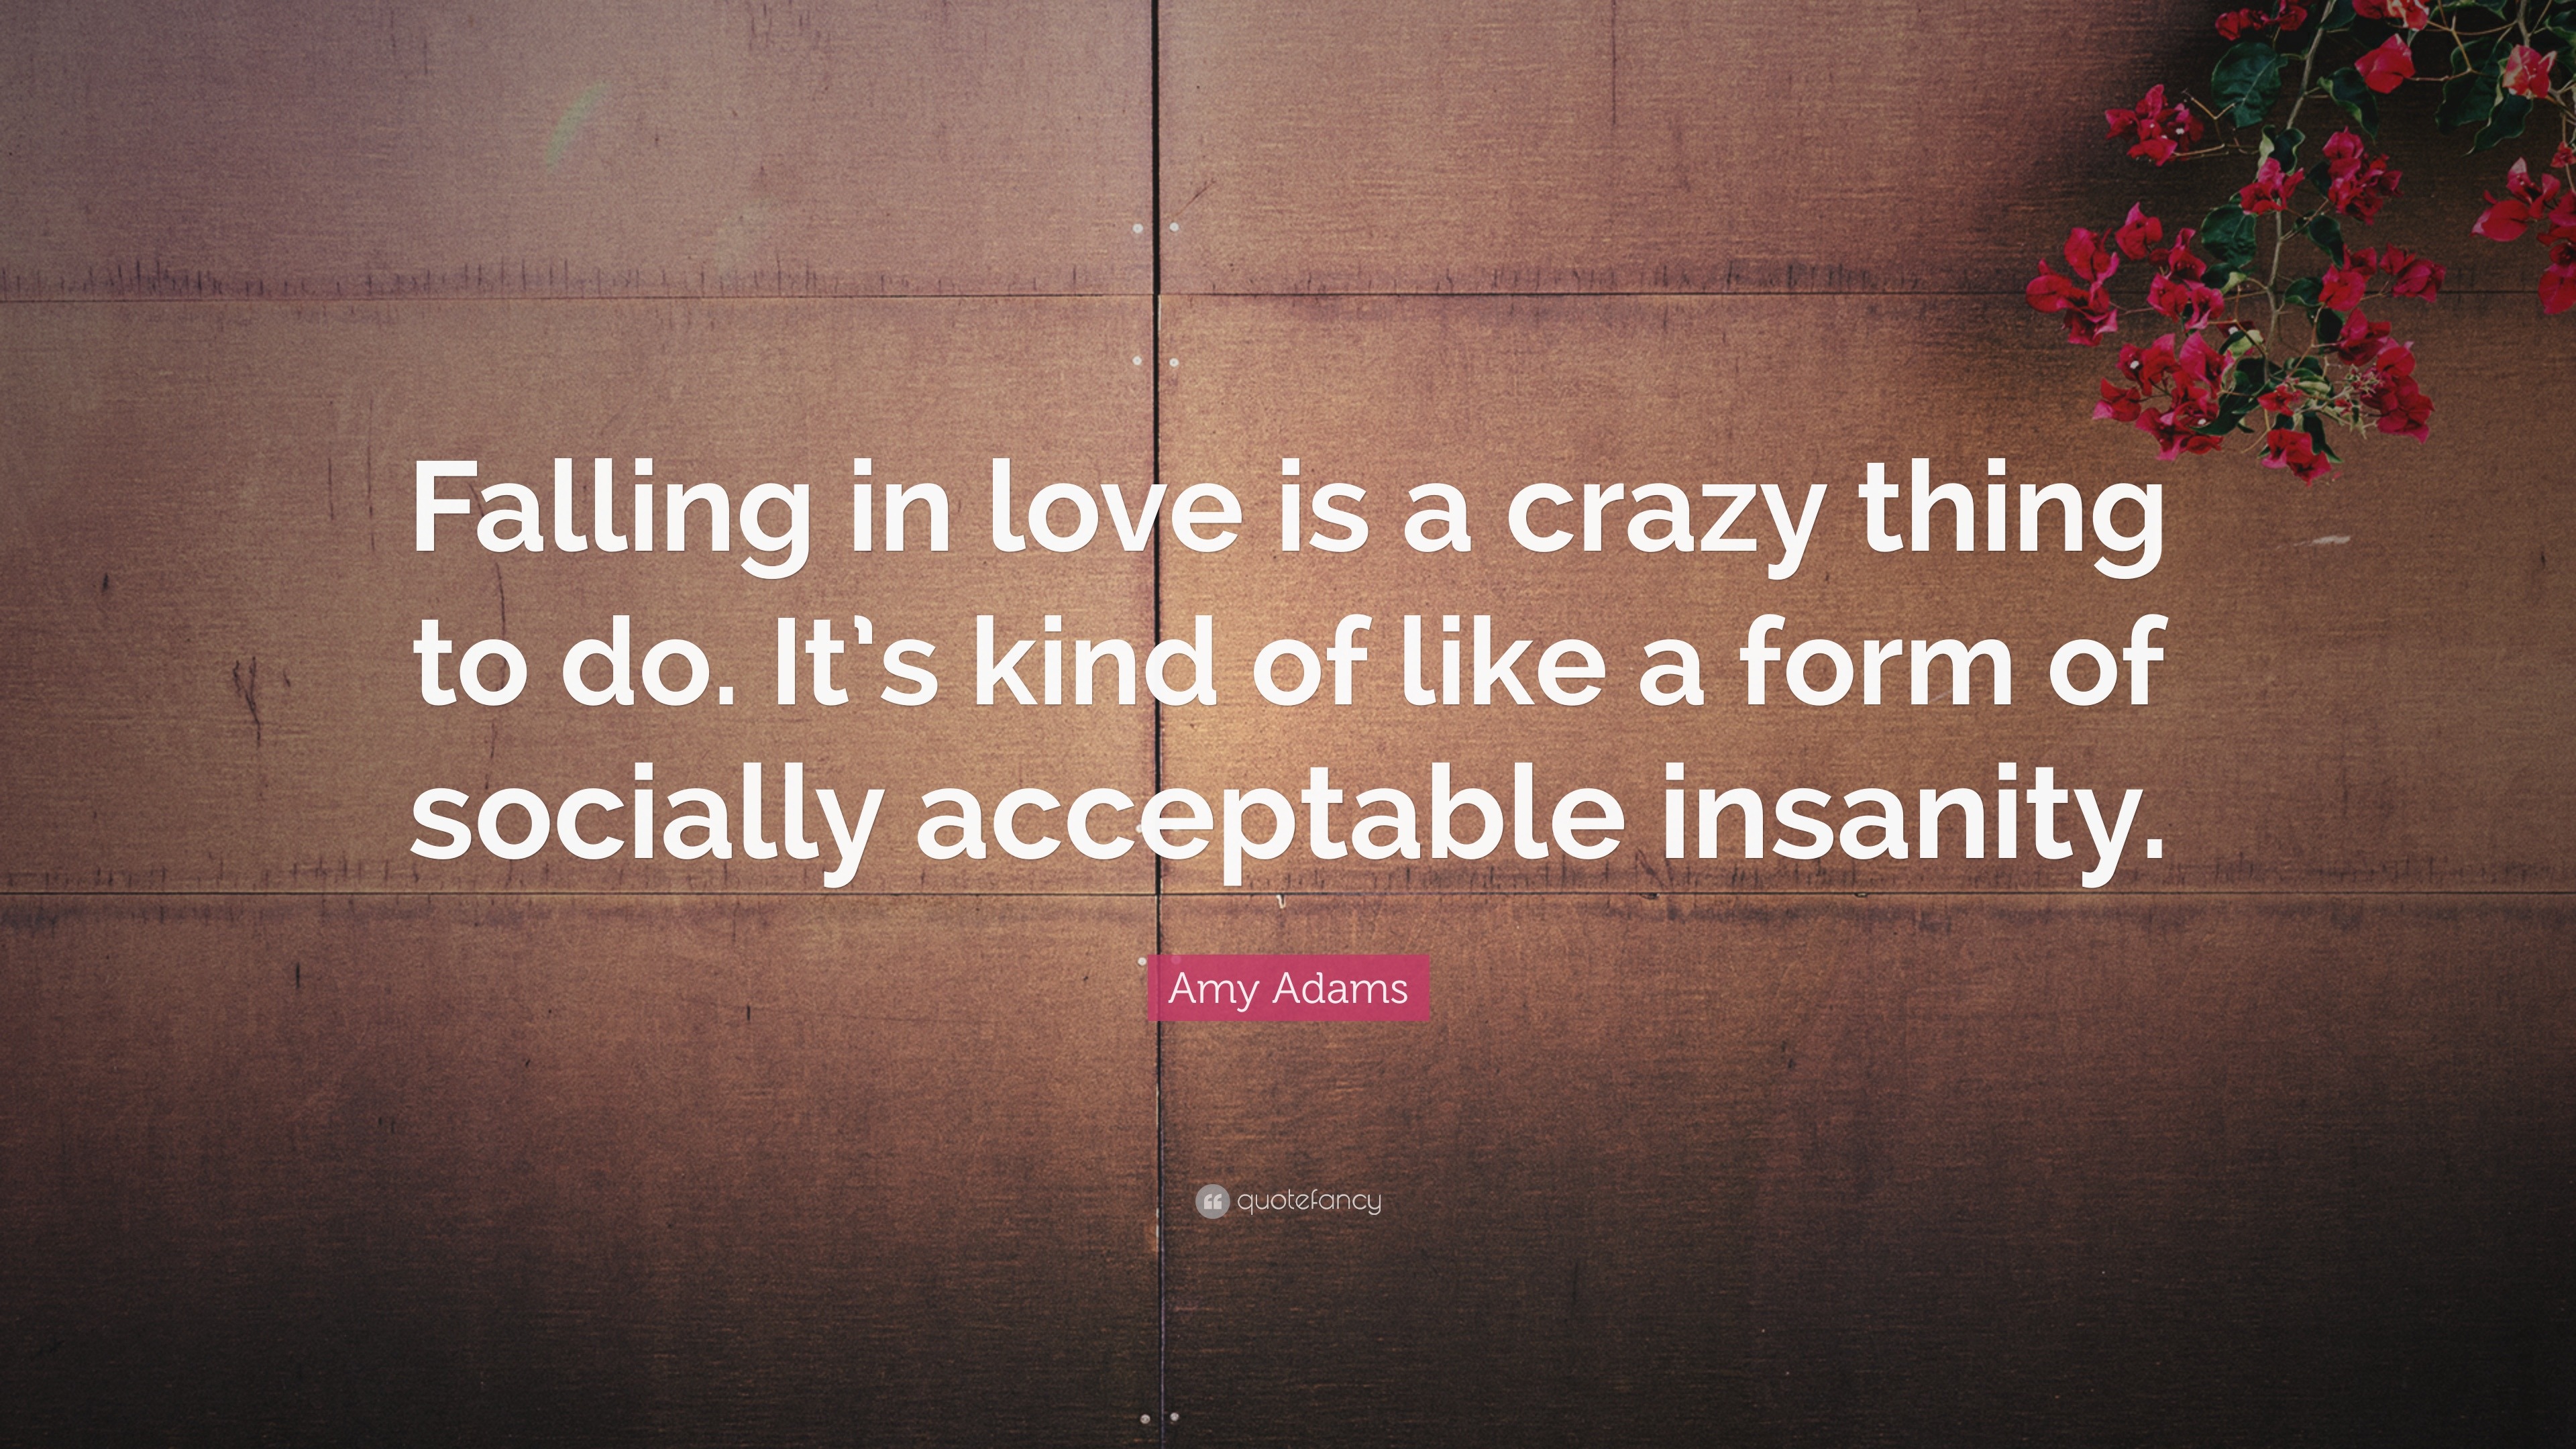 Amy Adams Quote “Falling in love is a crazy thing to do It s